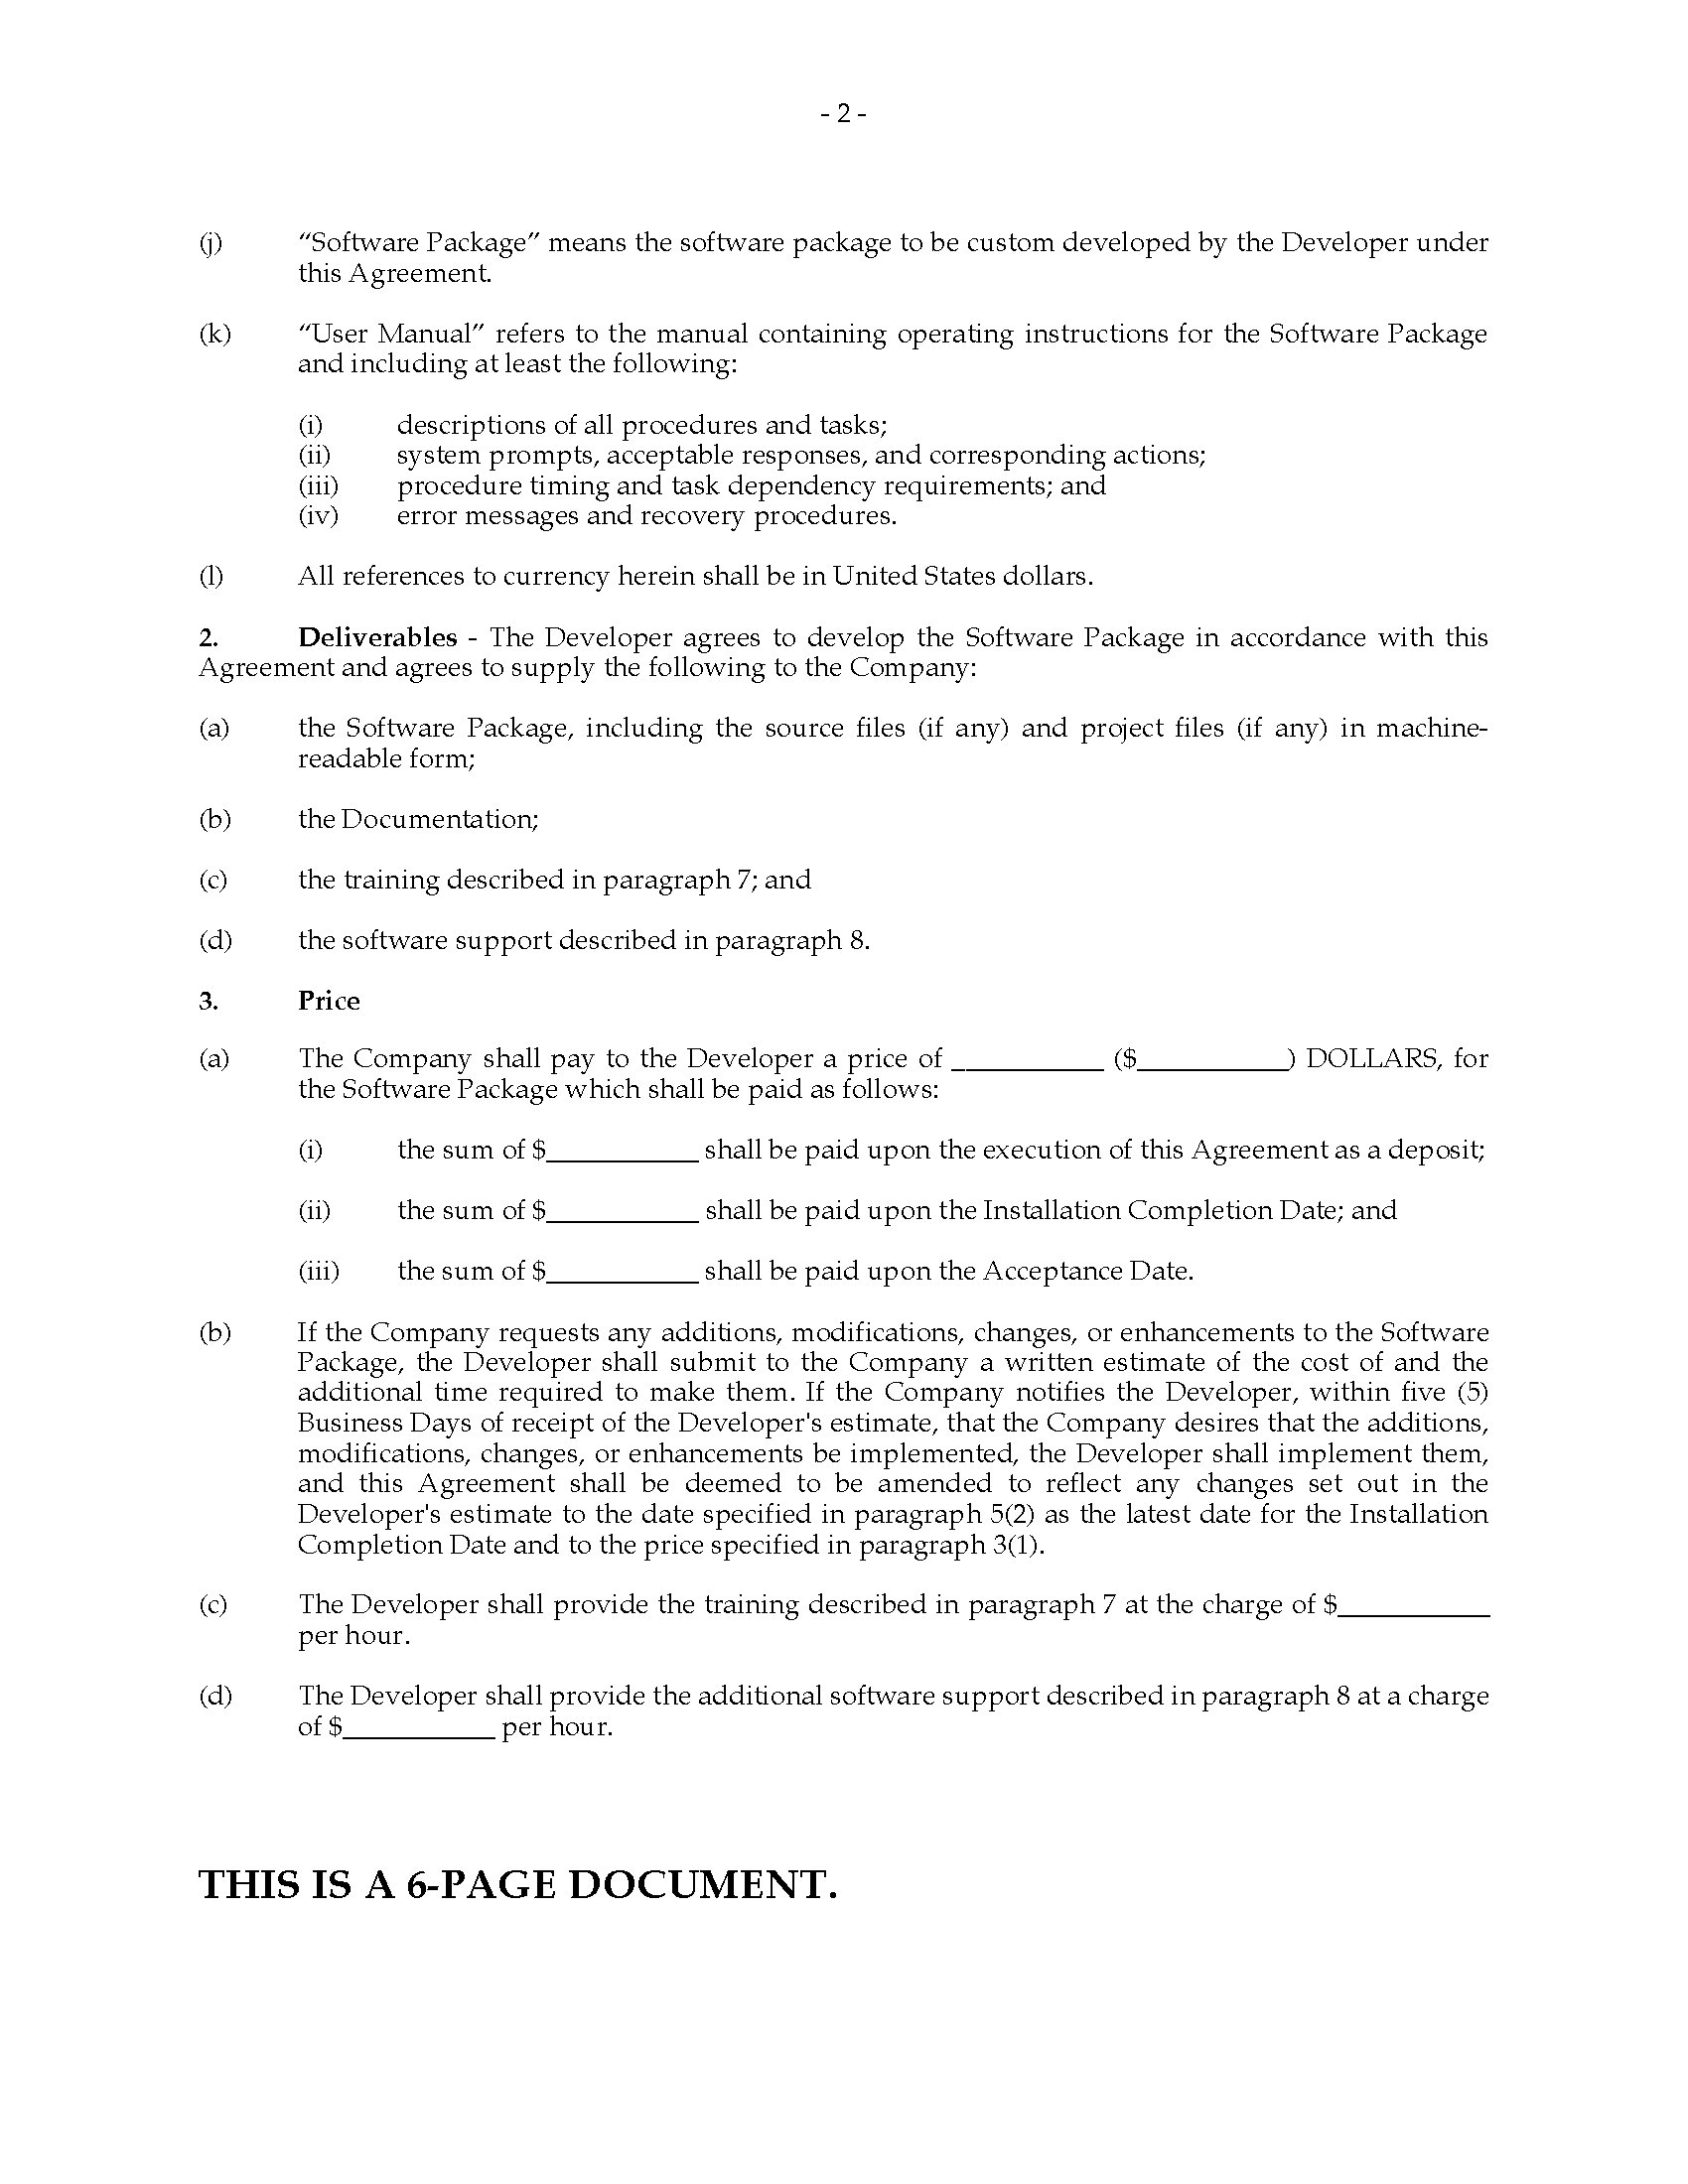 USA Software Development Agreement Legal Forms and Business Templates